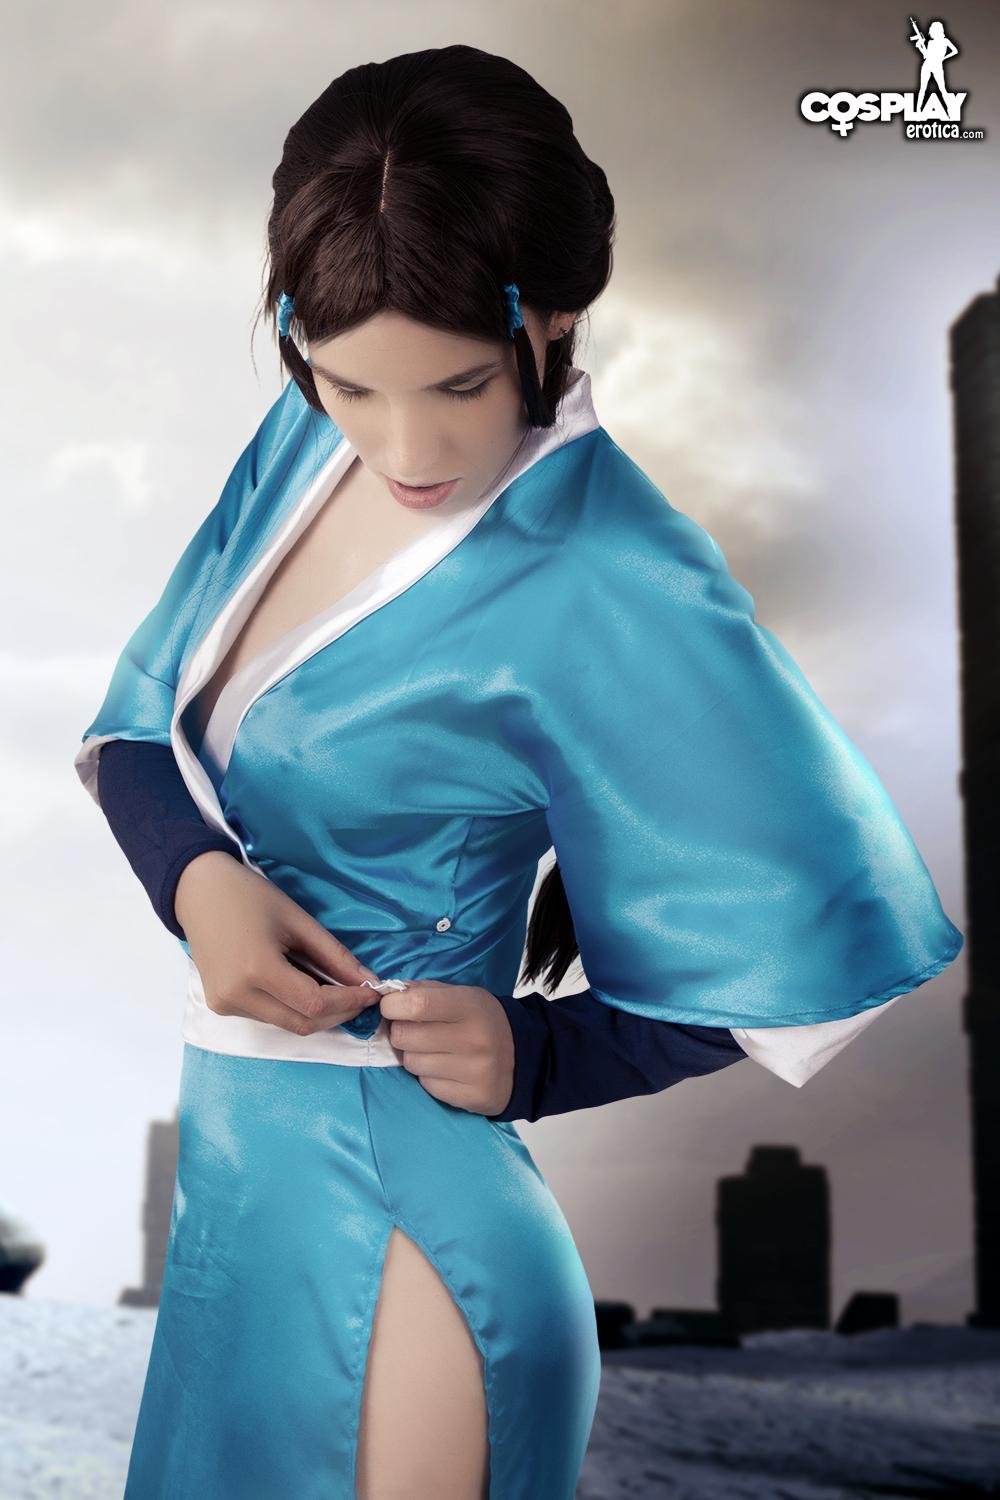 Avatar Navi Cosplay Porn - Sexy avatar cosplay - Adult Images 2018